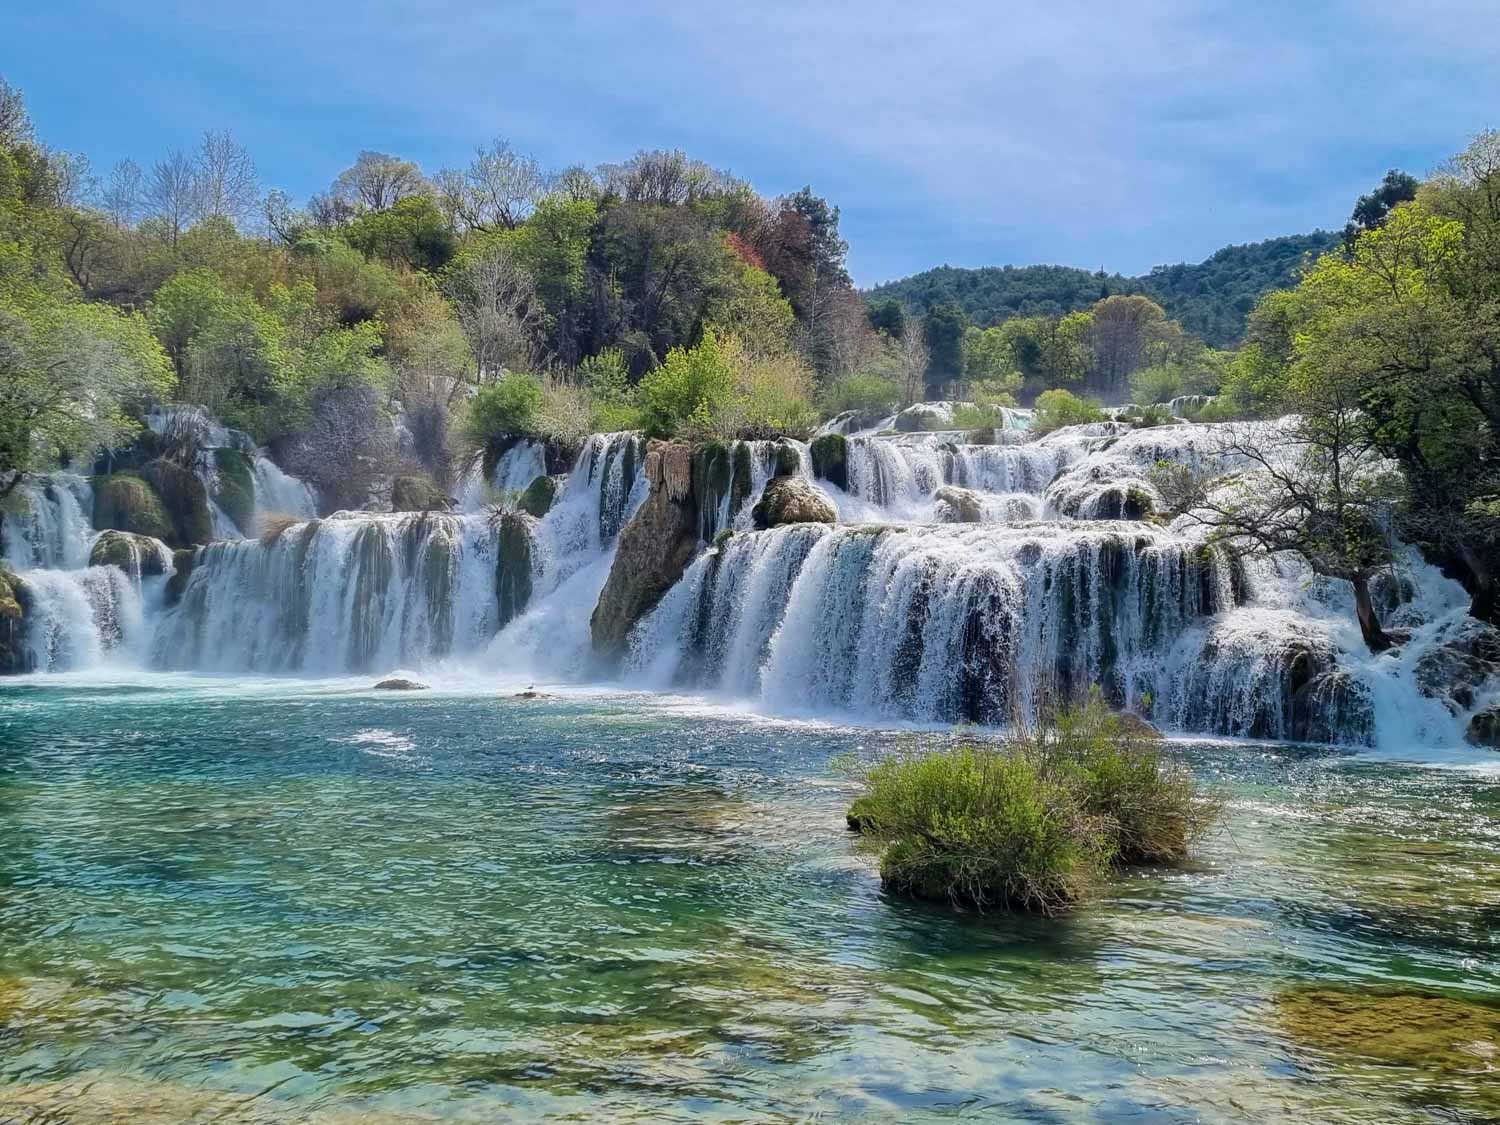 View of the turquoise water by one of the best known waterfalls of Krka National Park - one of the best day trips from Split with kids